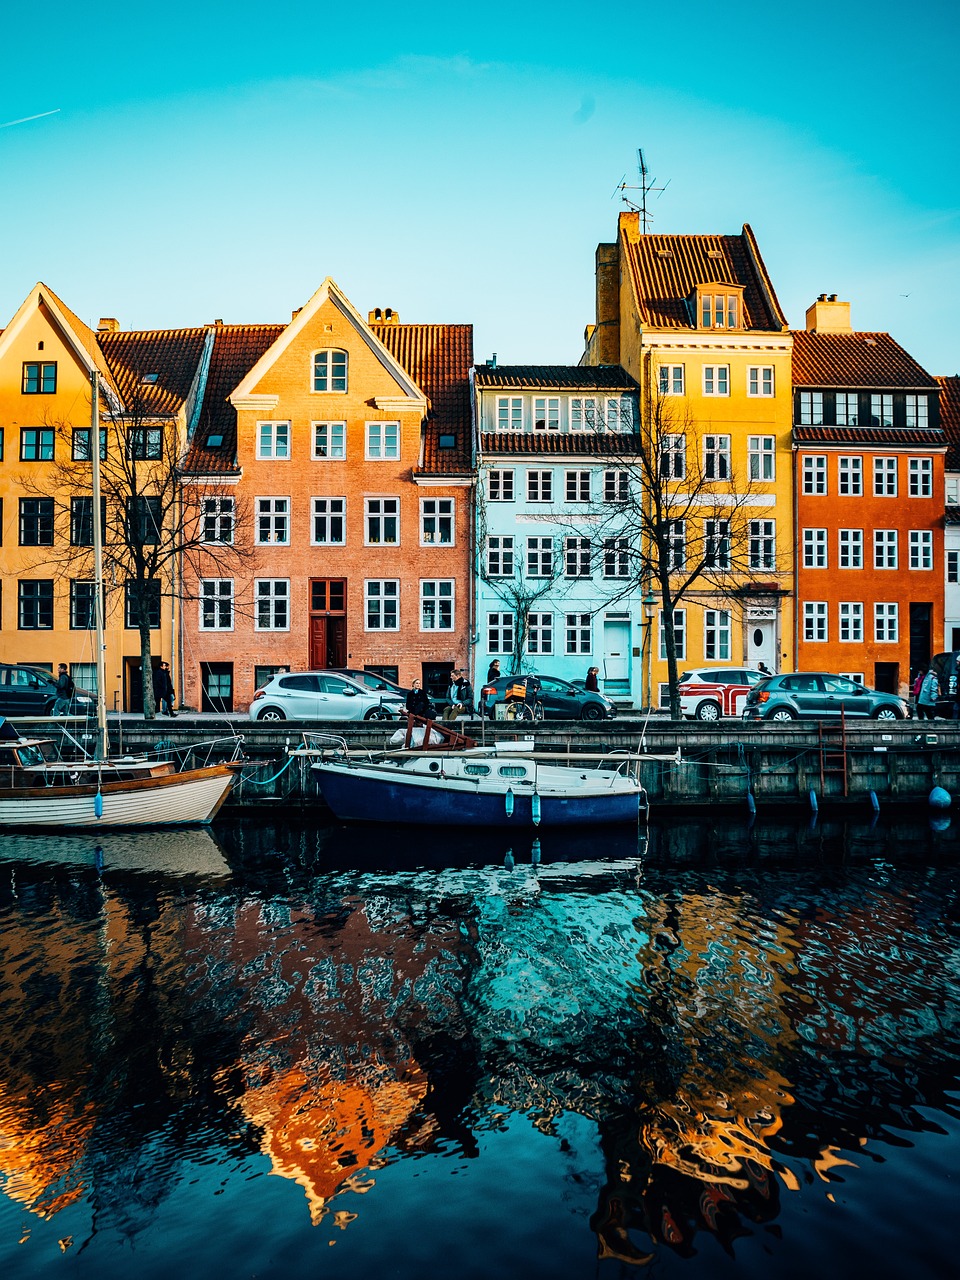 7 Days of Danish Culture and History